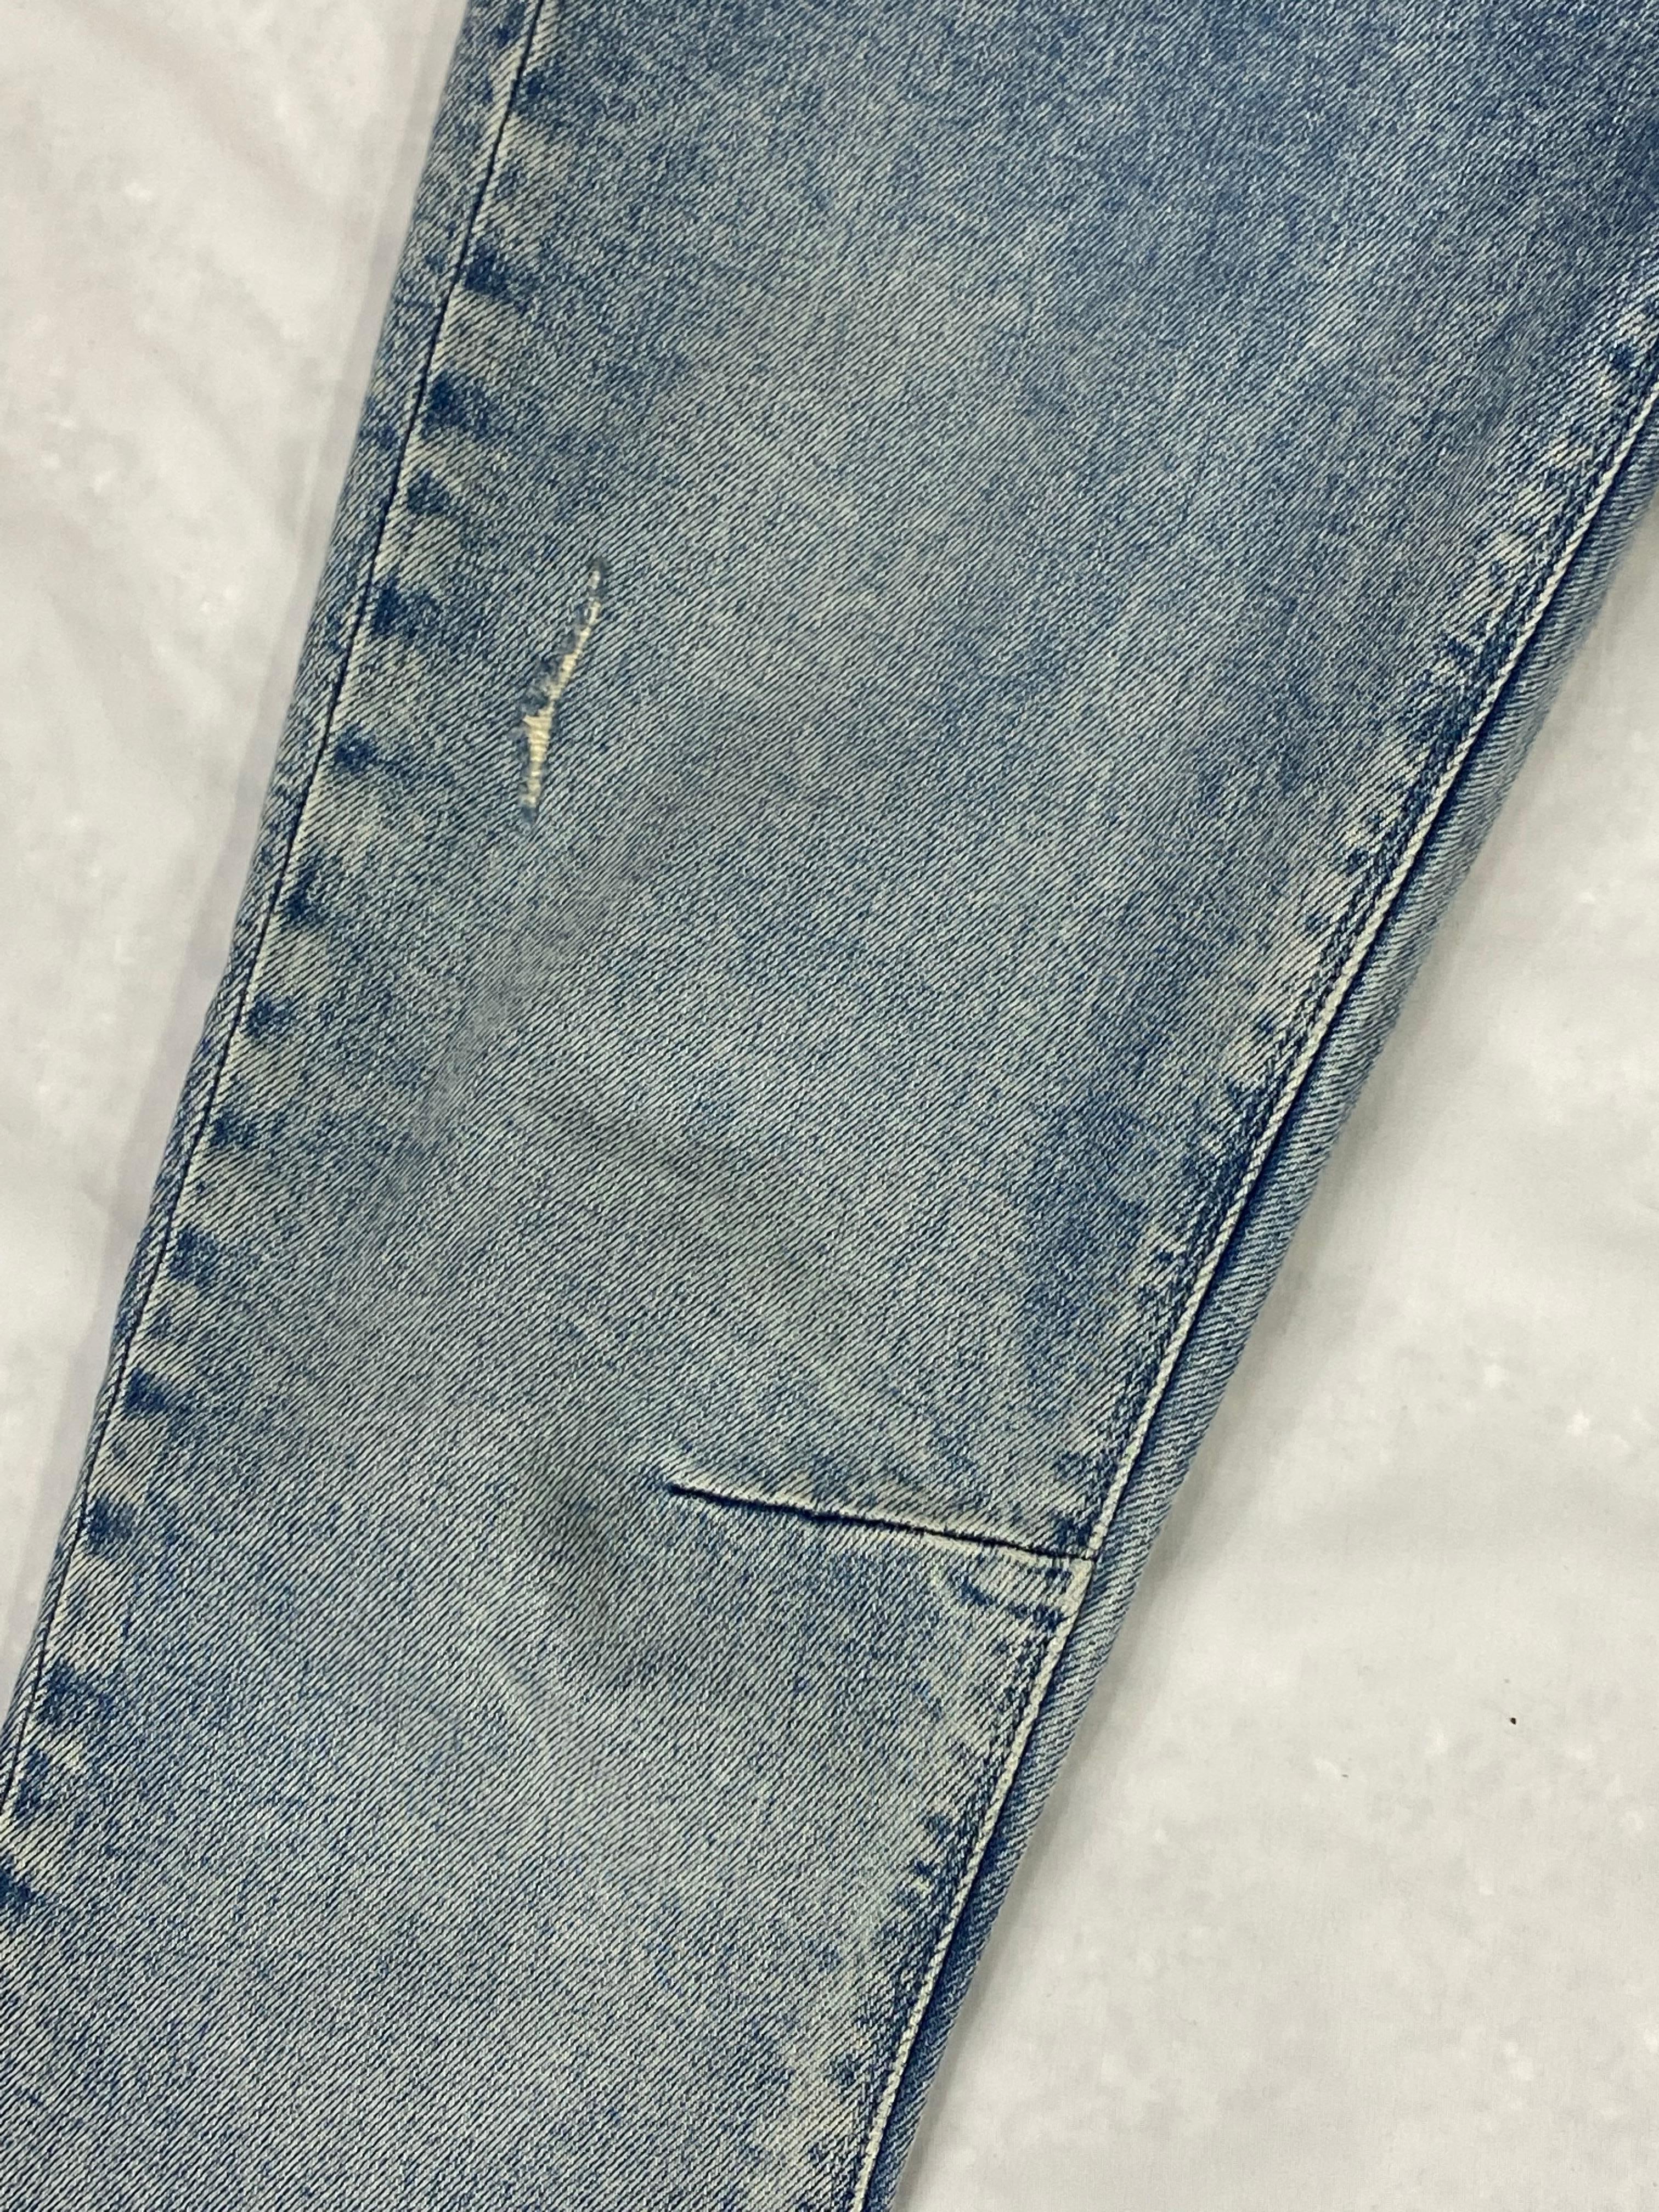 Product details:

The jeans feature skinny fit, light blue wash and cropped at the bottom.